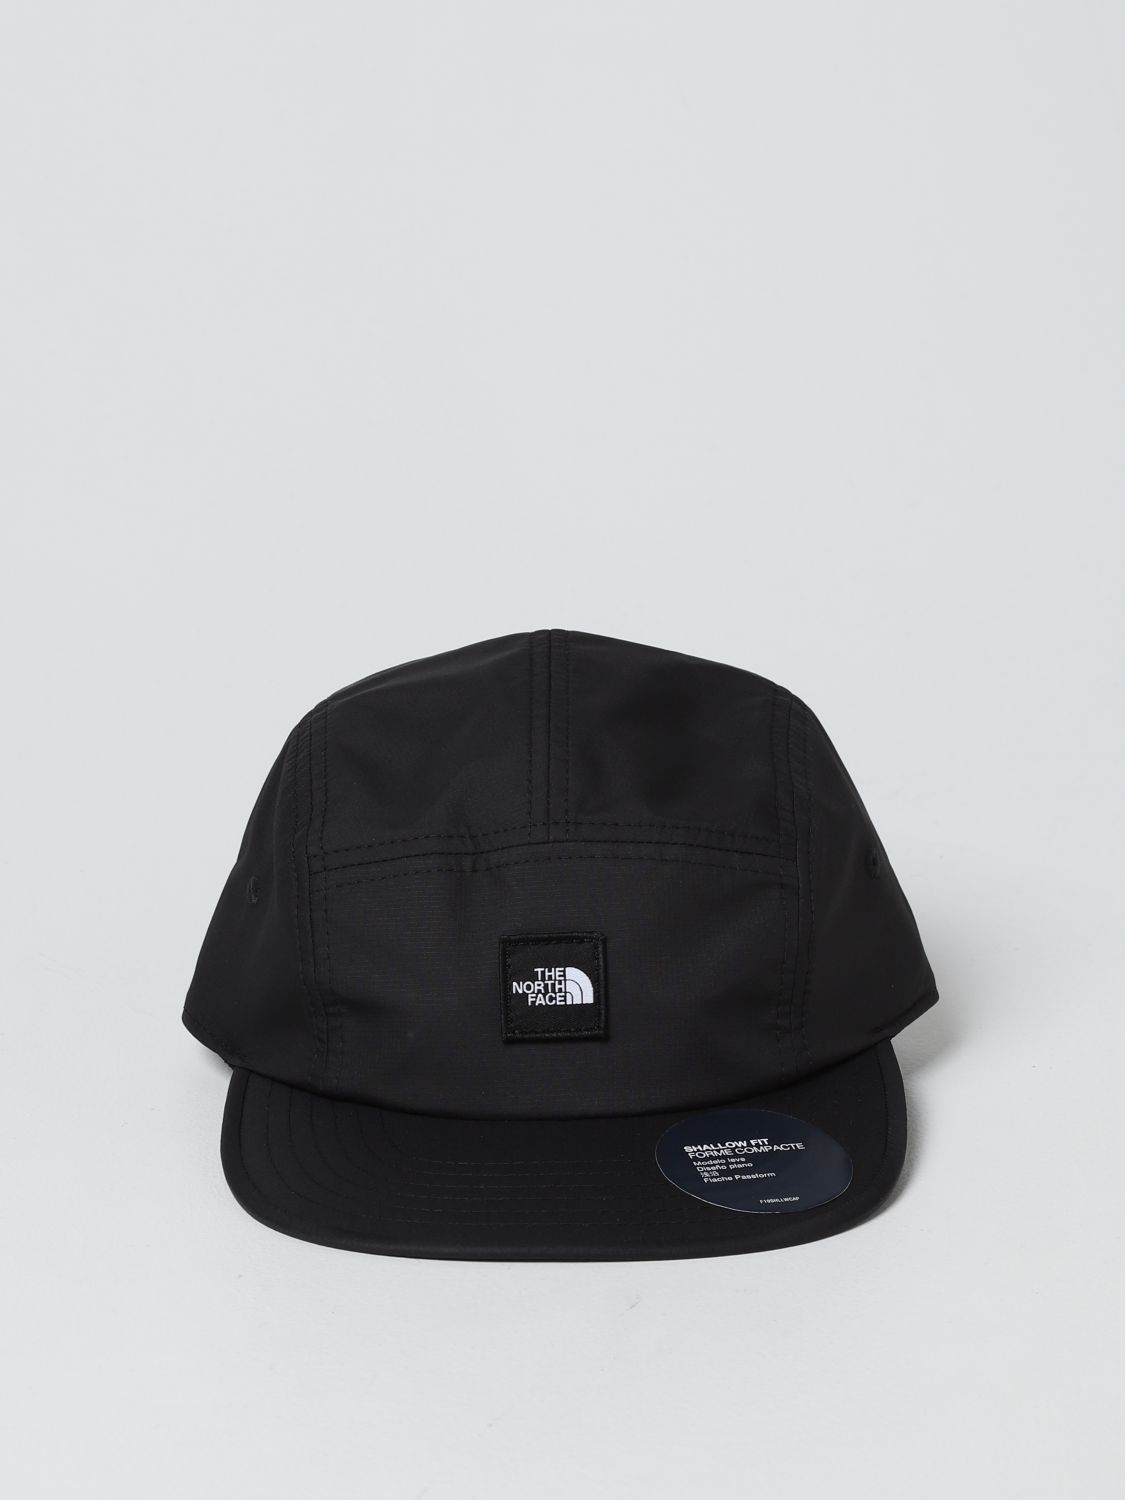 Hat The North Face: The North Face baseball cap with logo black 2